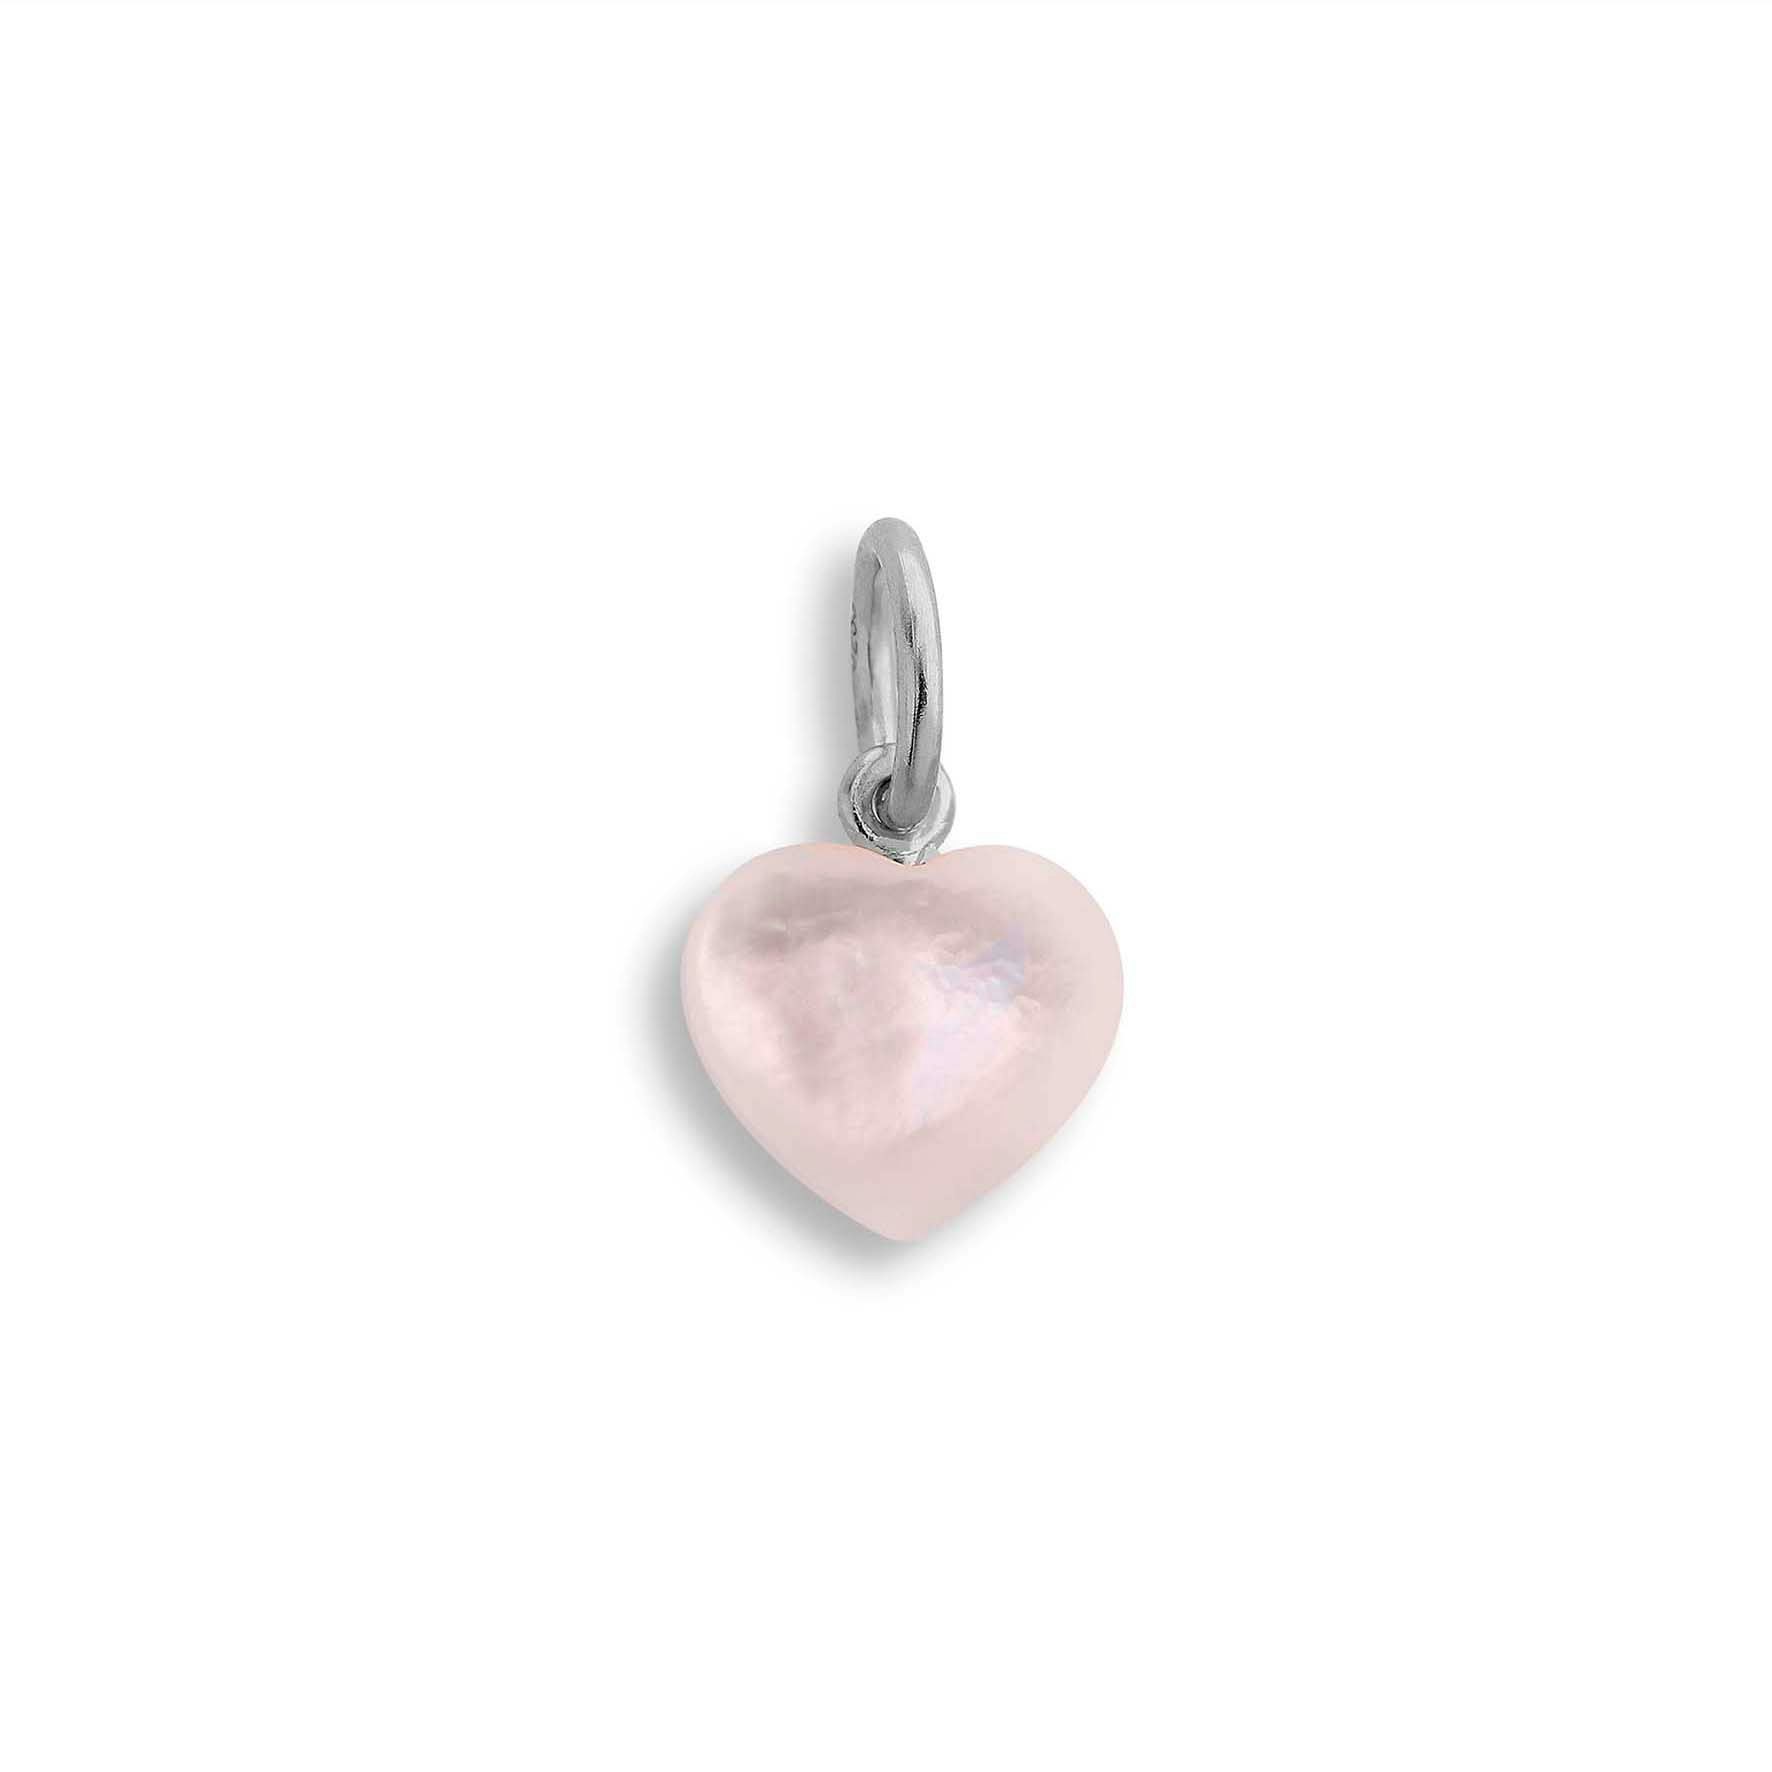 Small Souvenir Heart from Jane Kønig in Silver Sterling 925